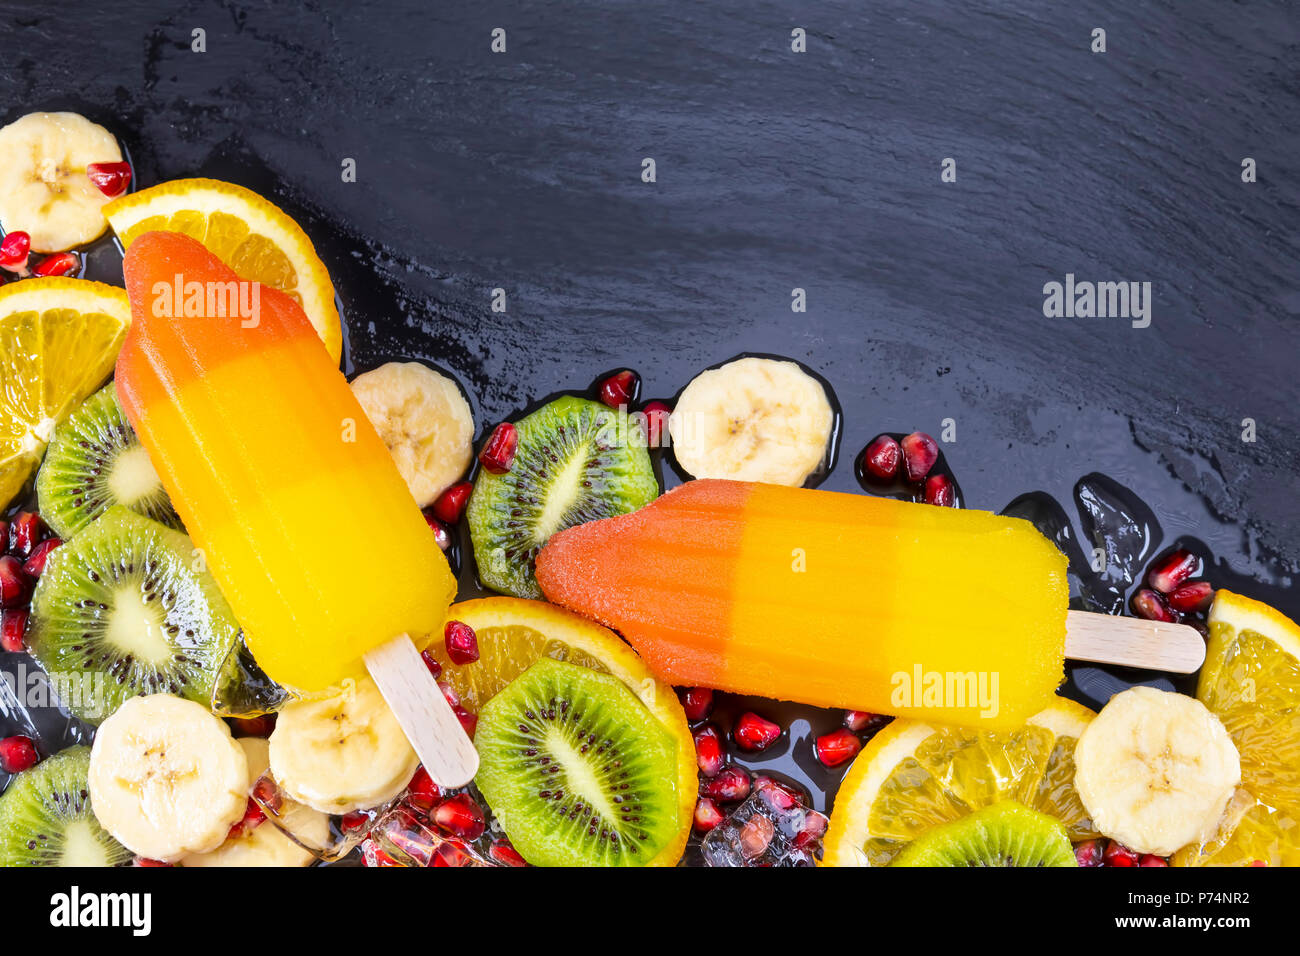 Fruit ice cream on stick with slices fruits on black slate board. Space for text! Focus on Popsicles. Stock Photo